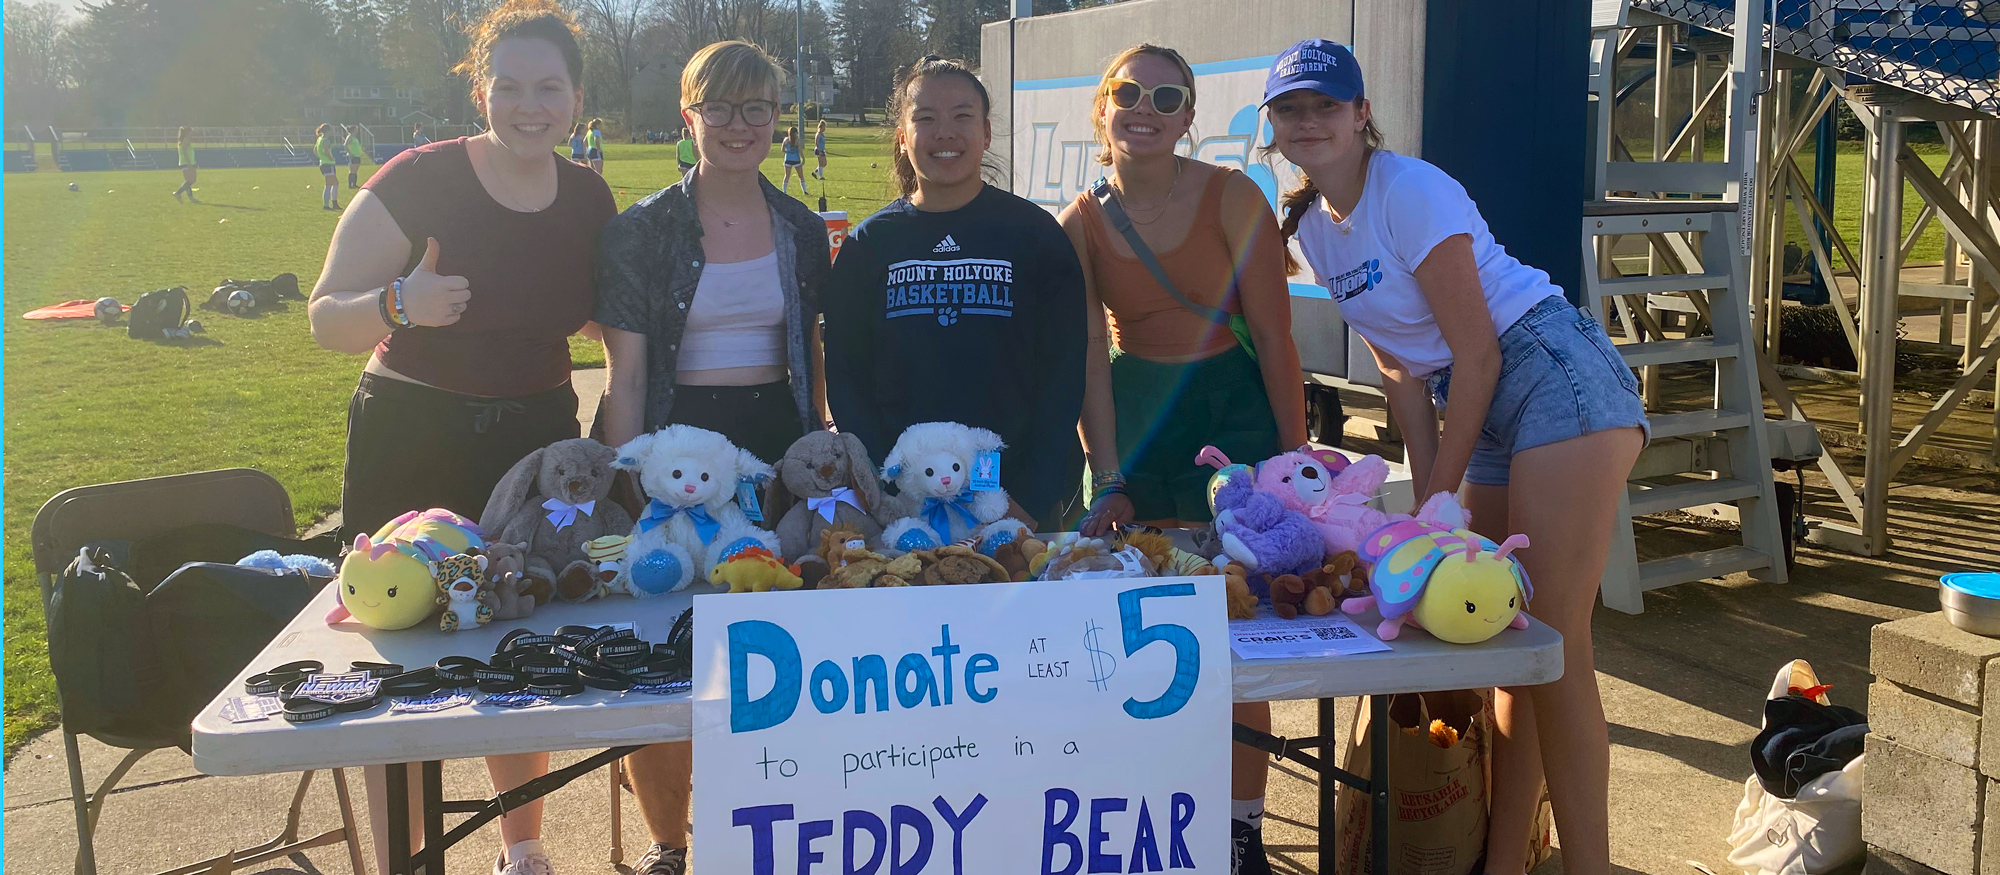 Mount Holyoke SAAC members ran a successful fundraiser for non-profit Craig's Doors at the home lacrosse game during Division III Week on April 12, 2023.